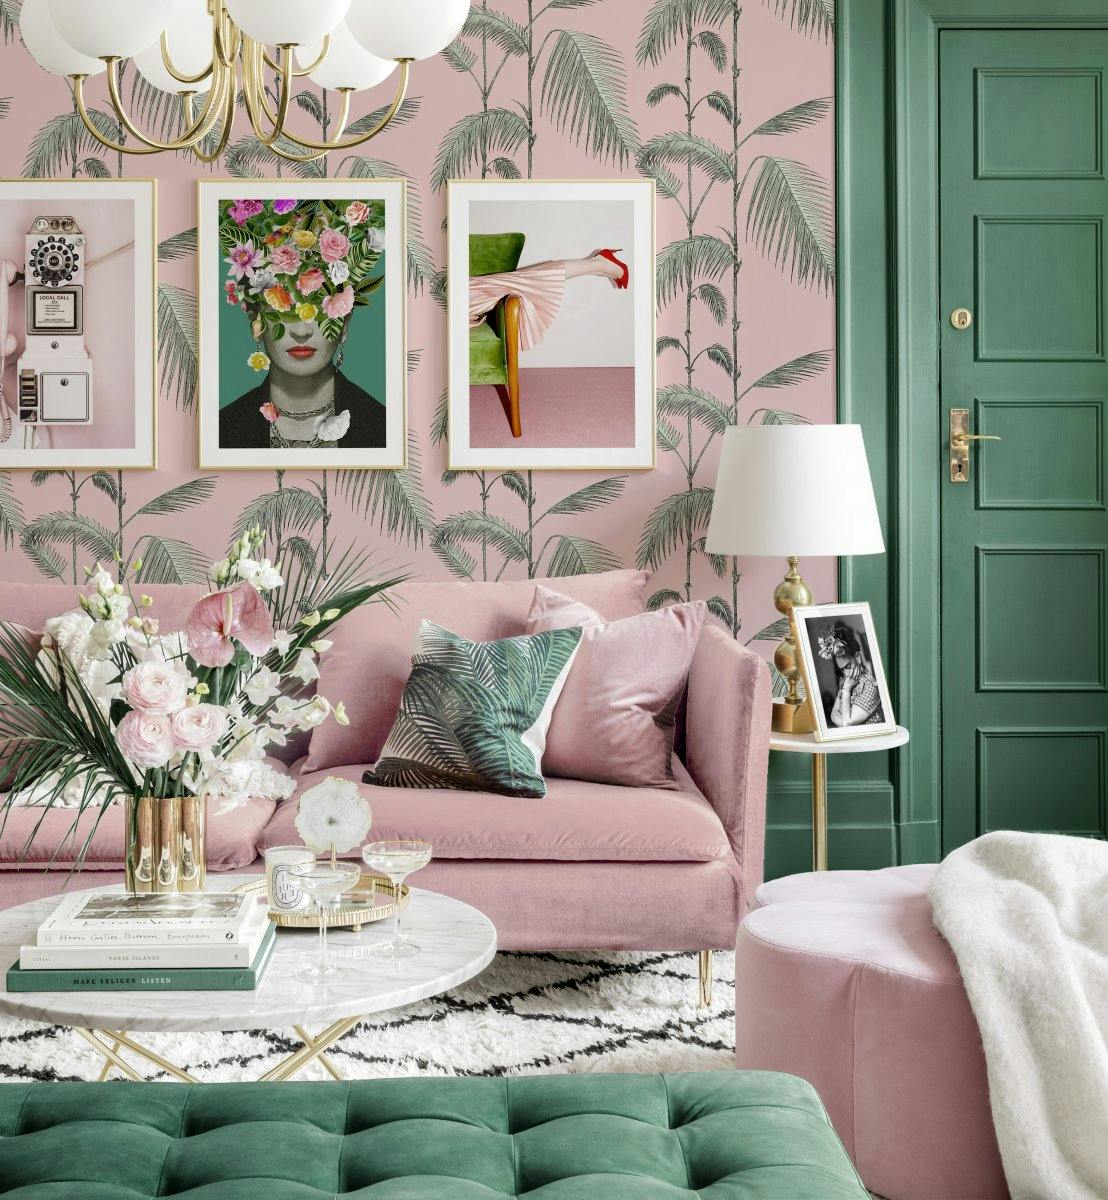 Good vibes gallery wall chinoiserie frida kahlo prints pink and green living room